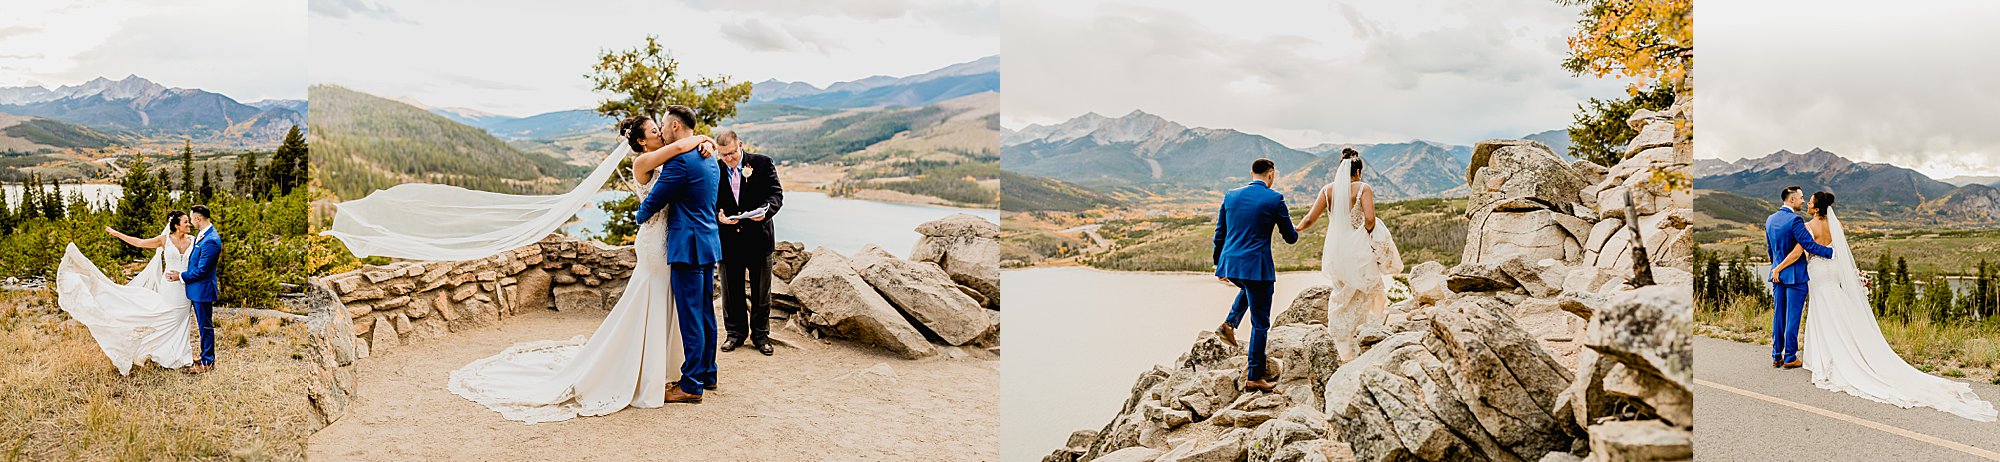 Couple elopes in the mountains of breckenridge colorado in the fall, captured by Lauren Casino Photography, an adventure elopement photographer